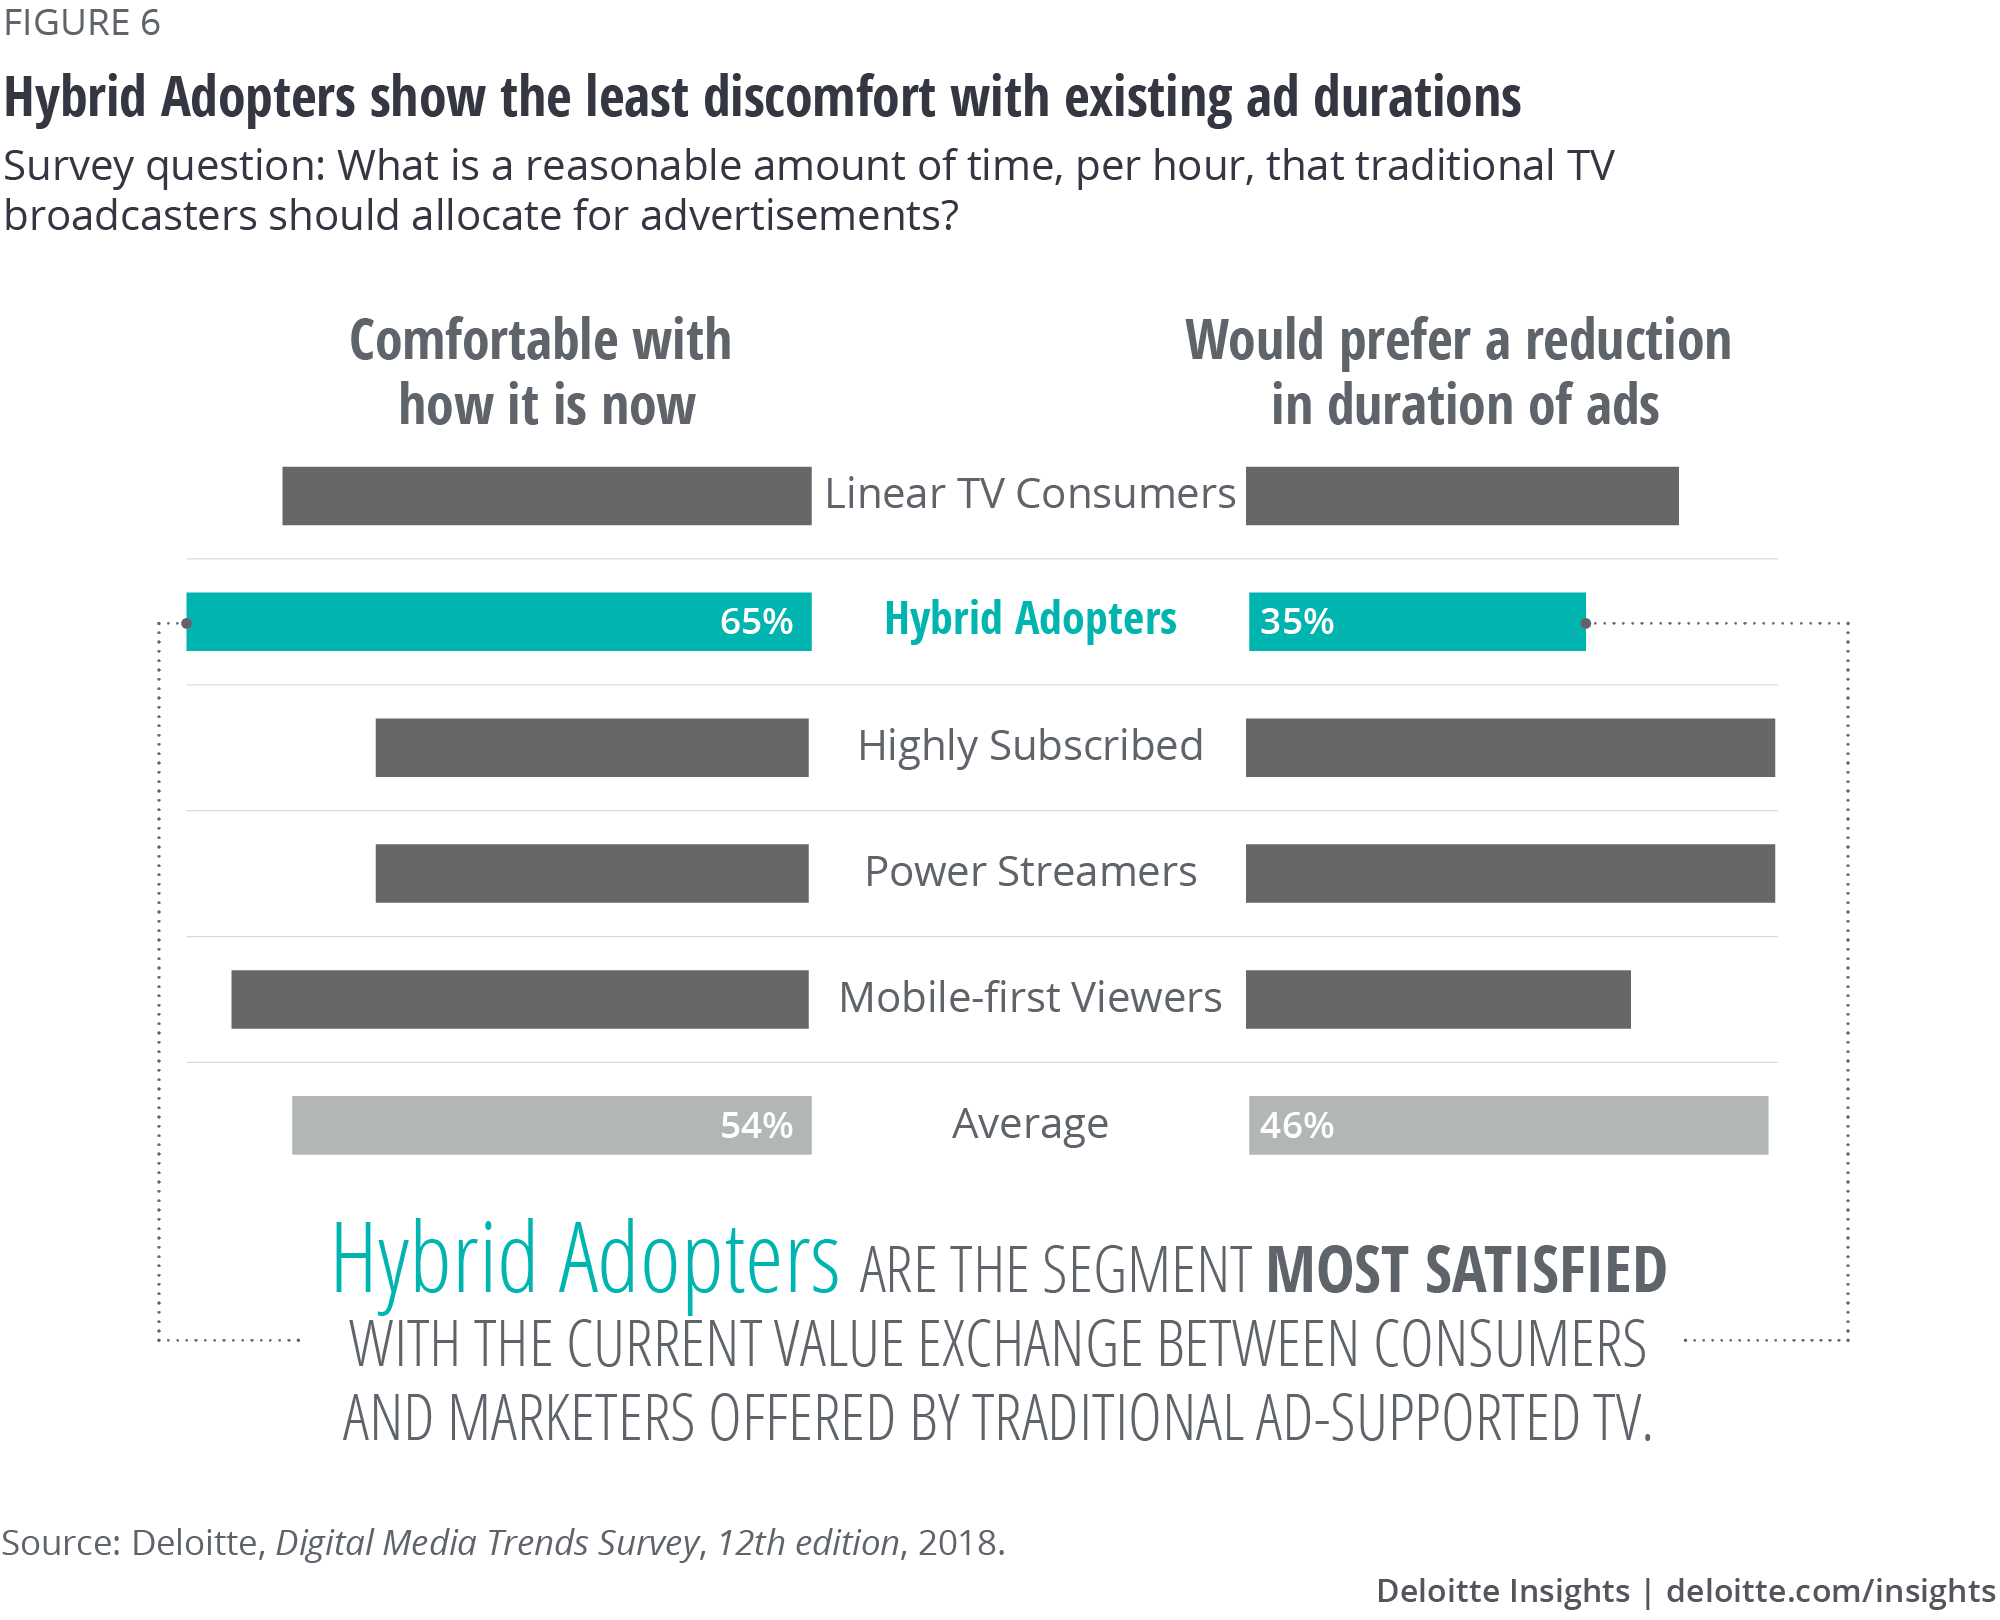 Hybrid Adopters show the least discomfort with existing ad durations